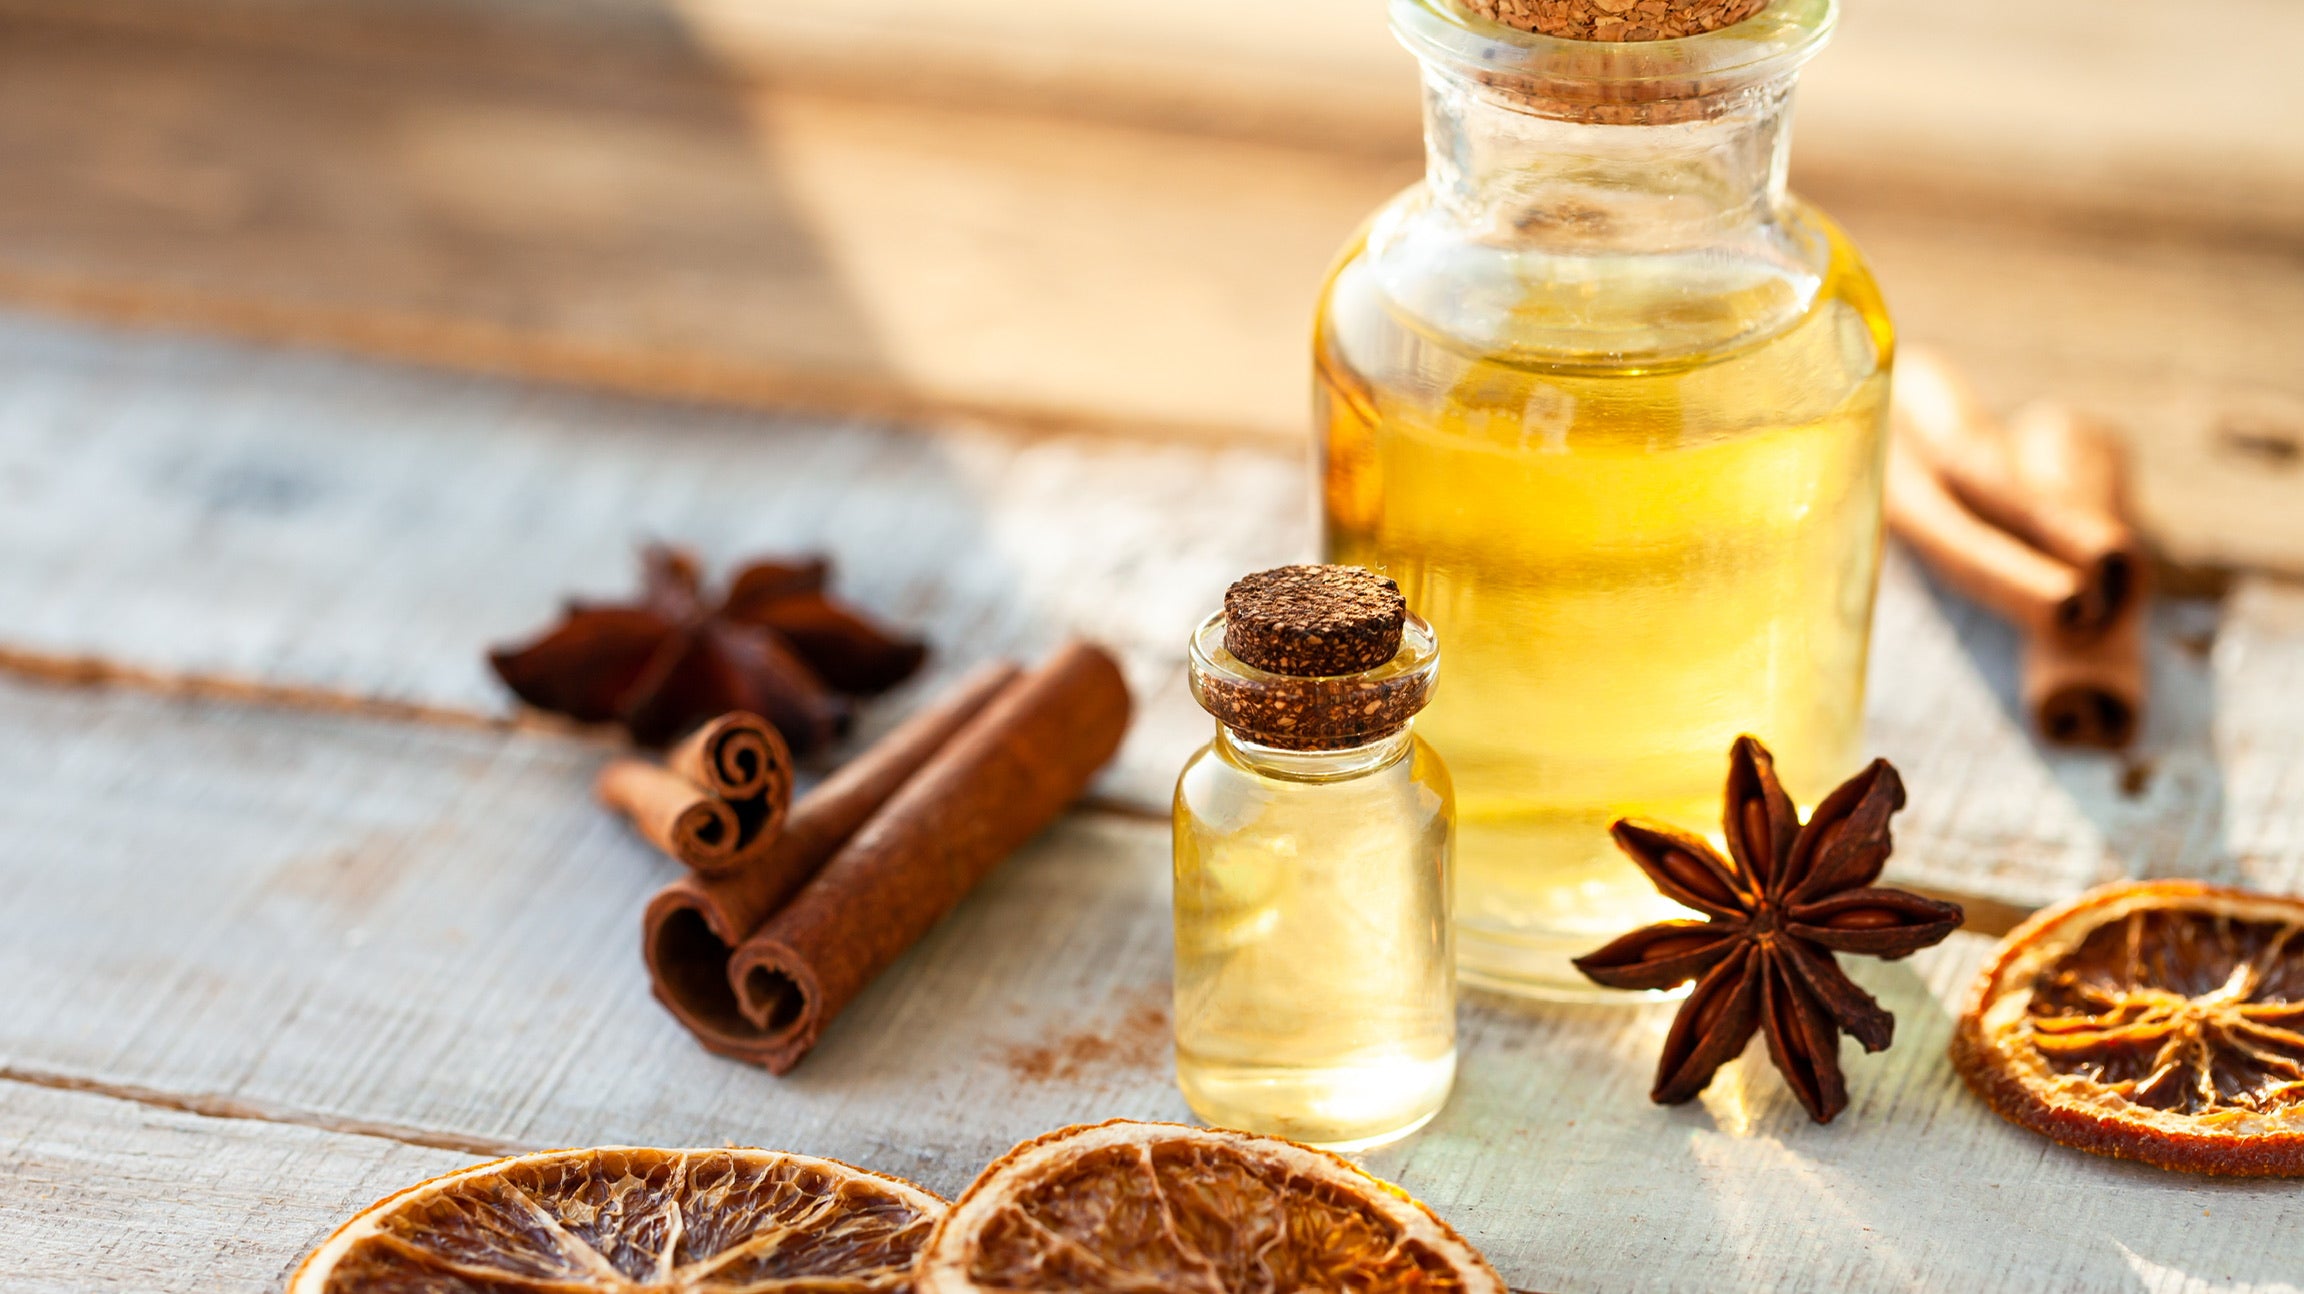 Autumn Spice Extract (Contains no Cinnamon)